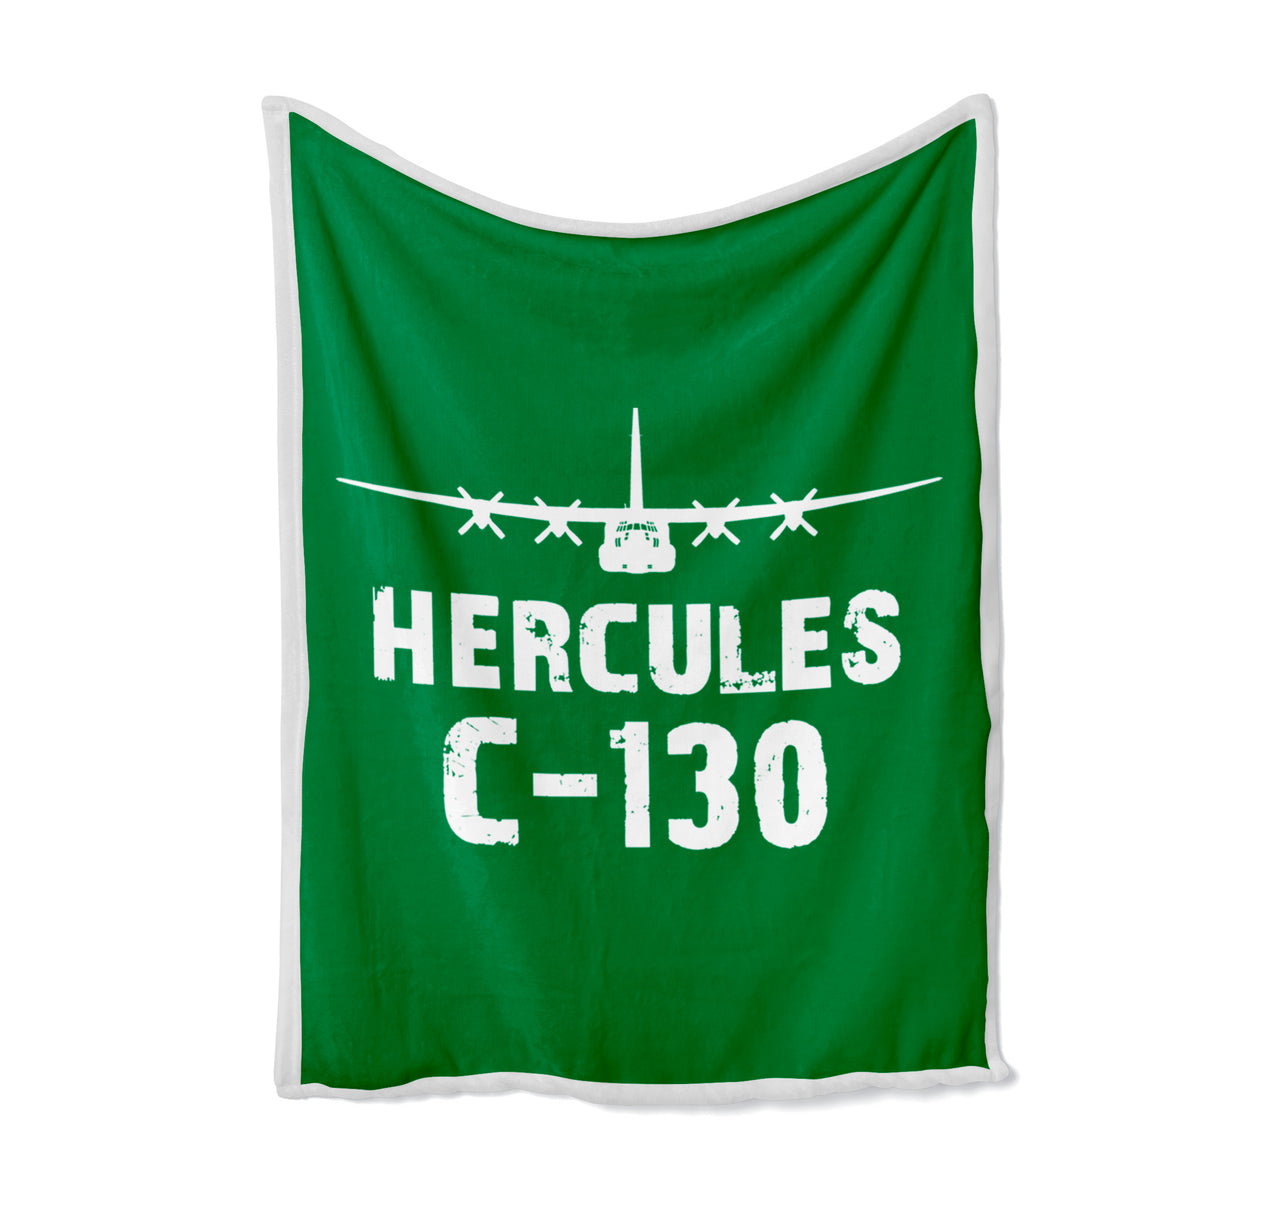 Hercules C-130 & Plane Designed Bed Blankets & Covers